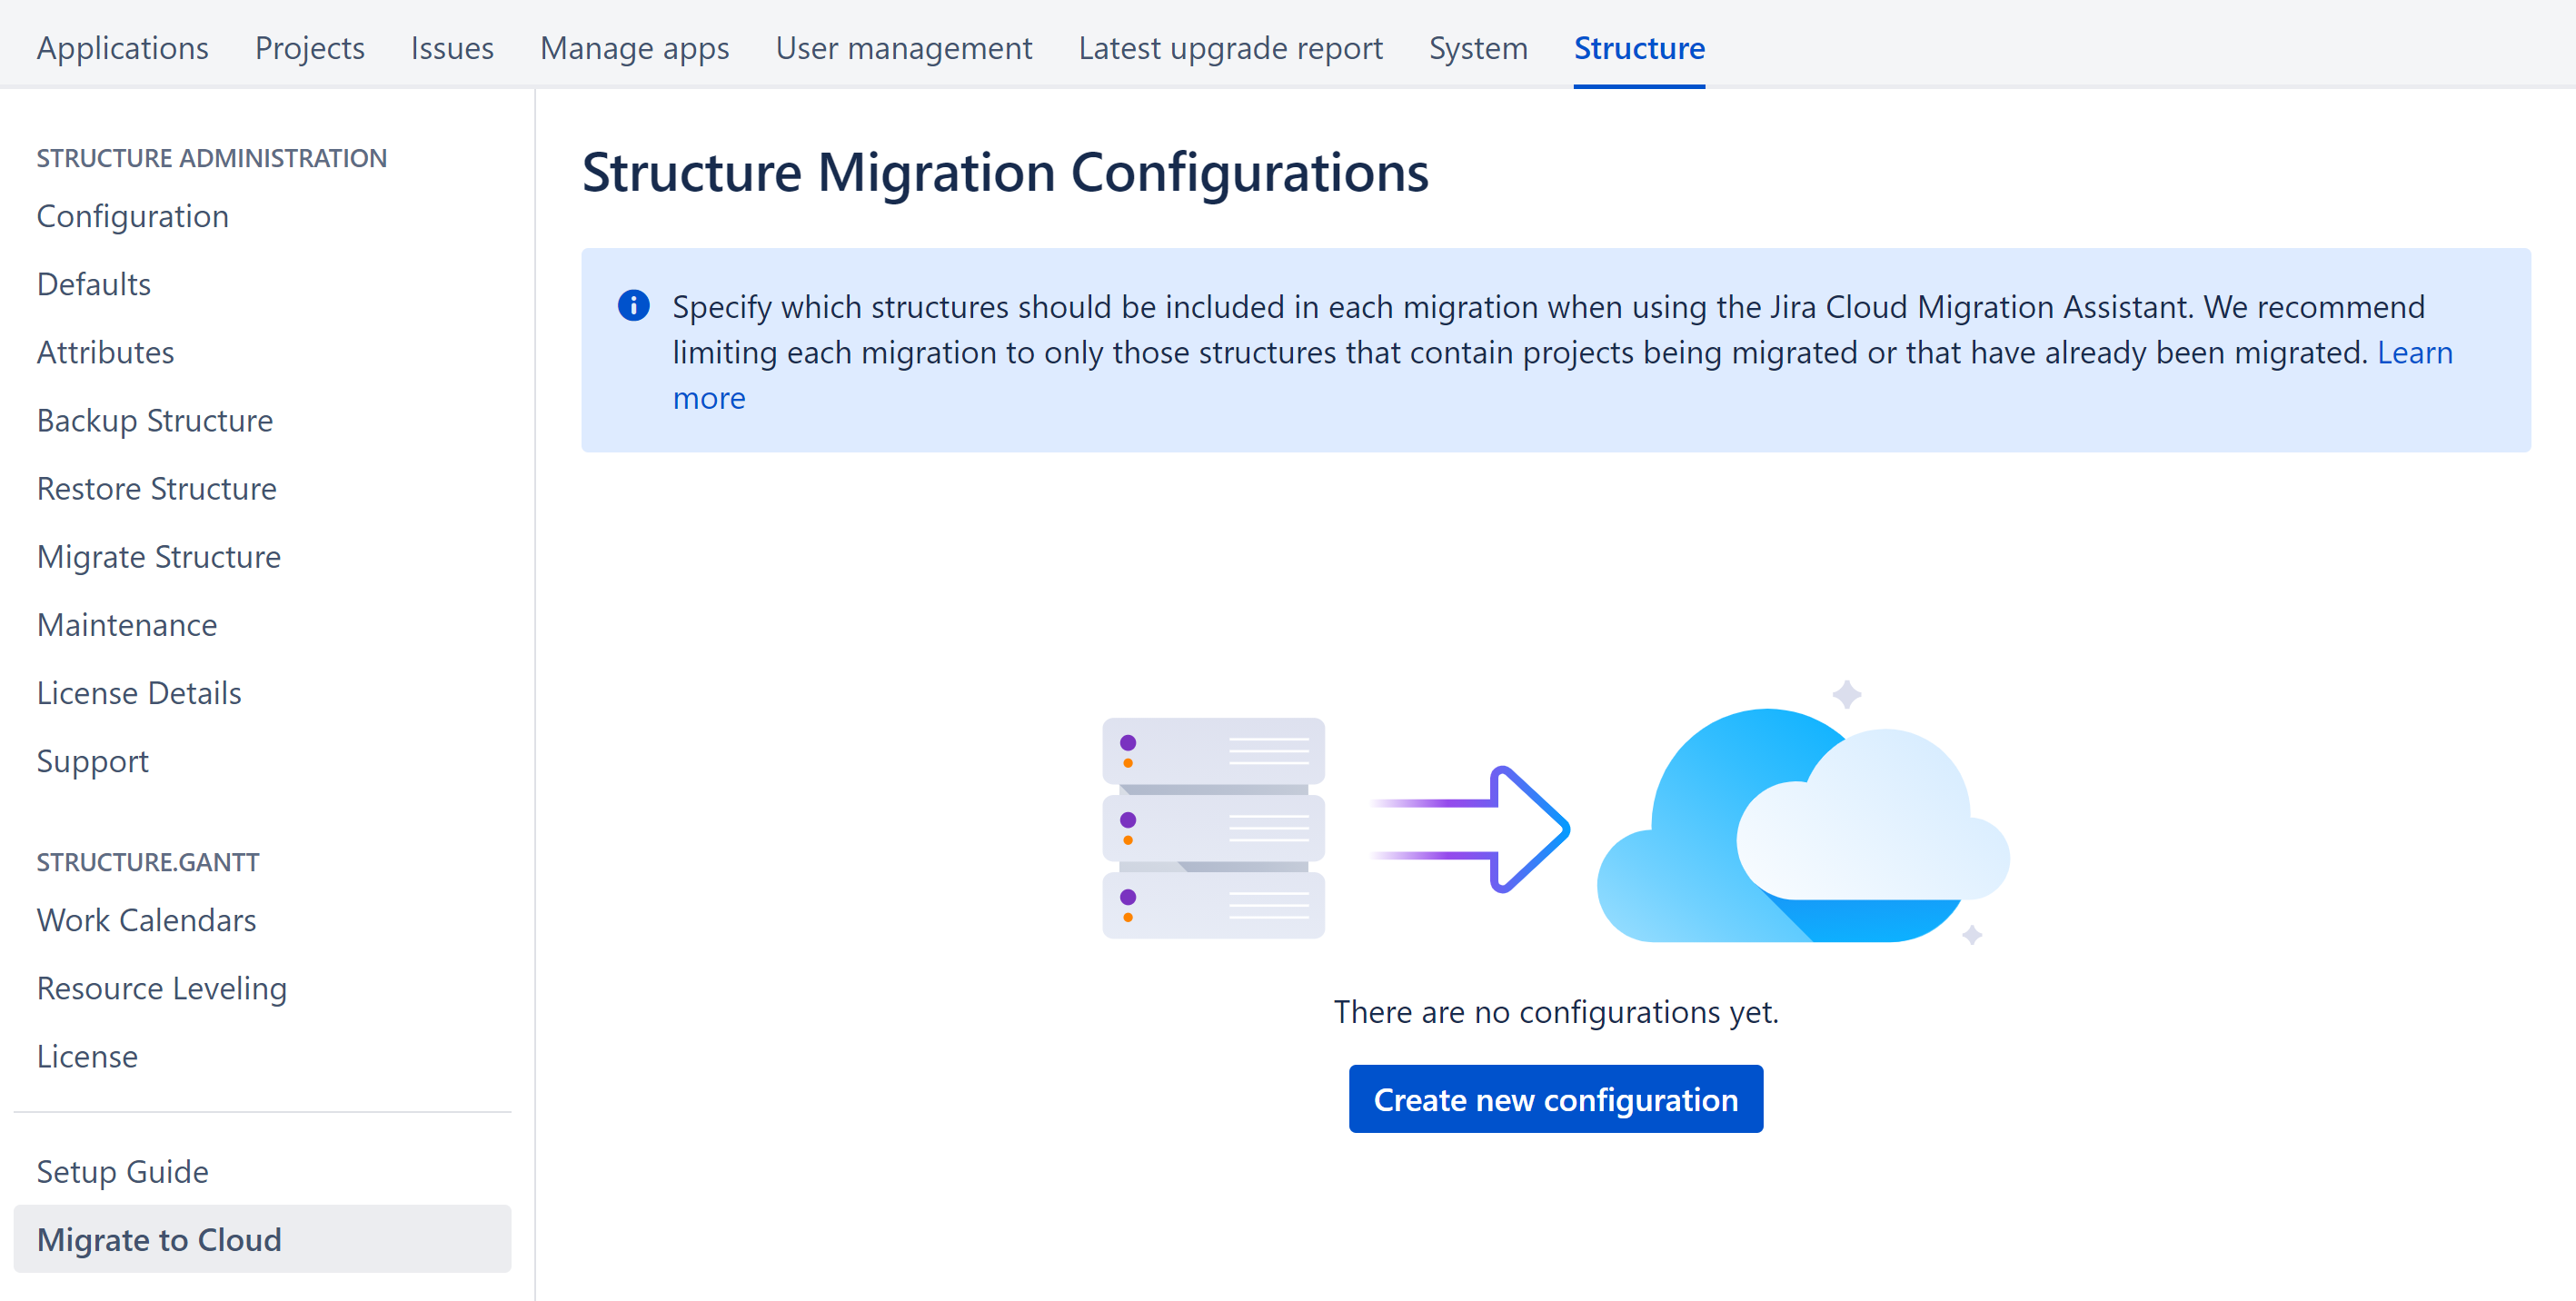 Migrate structures to Jira Cloud